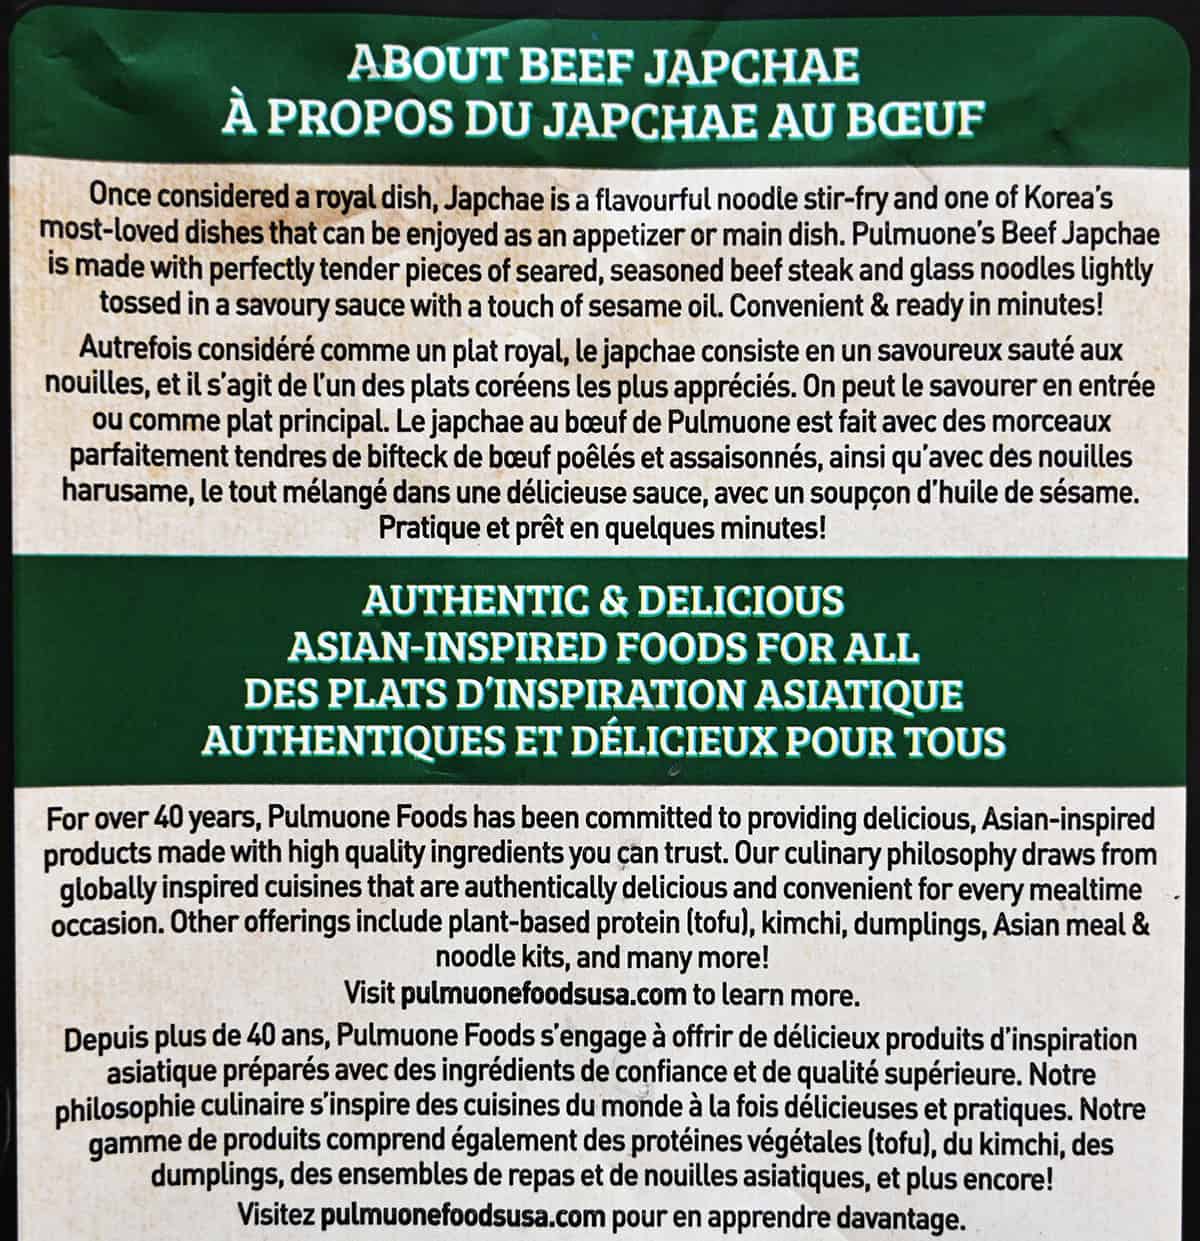 Image of an "About Beef Japchae" description from the package.